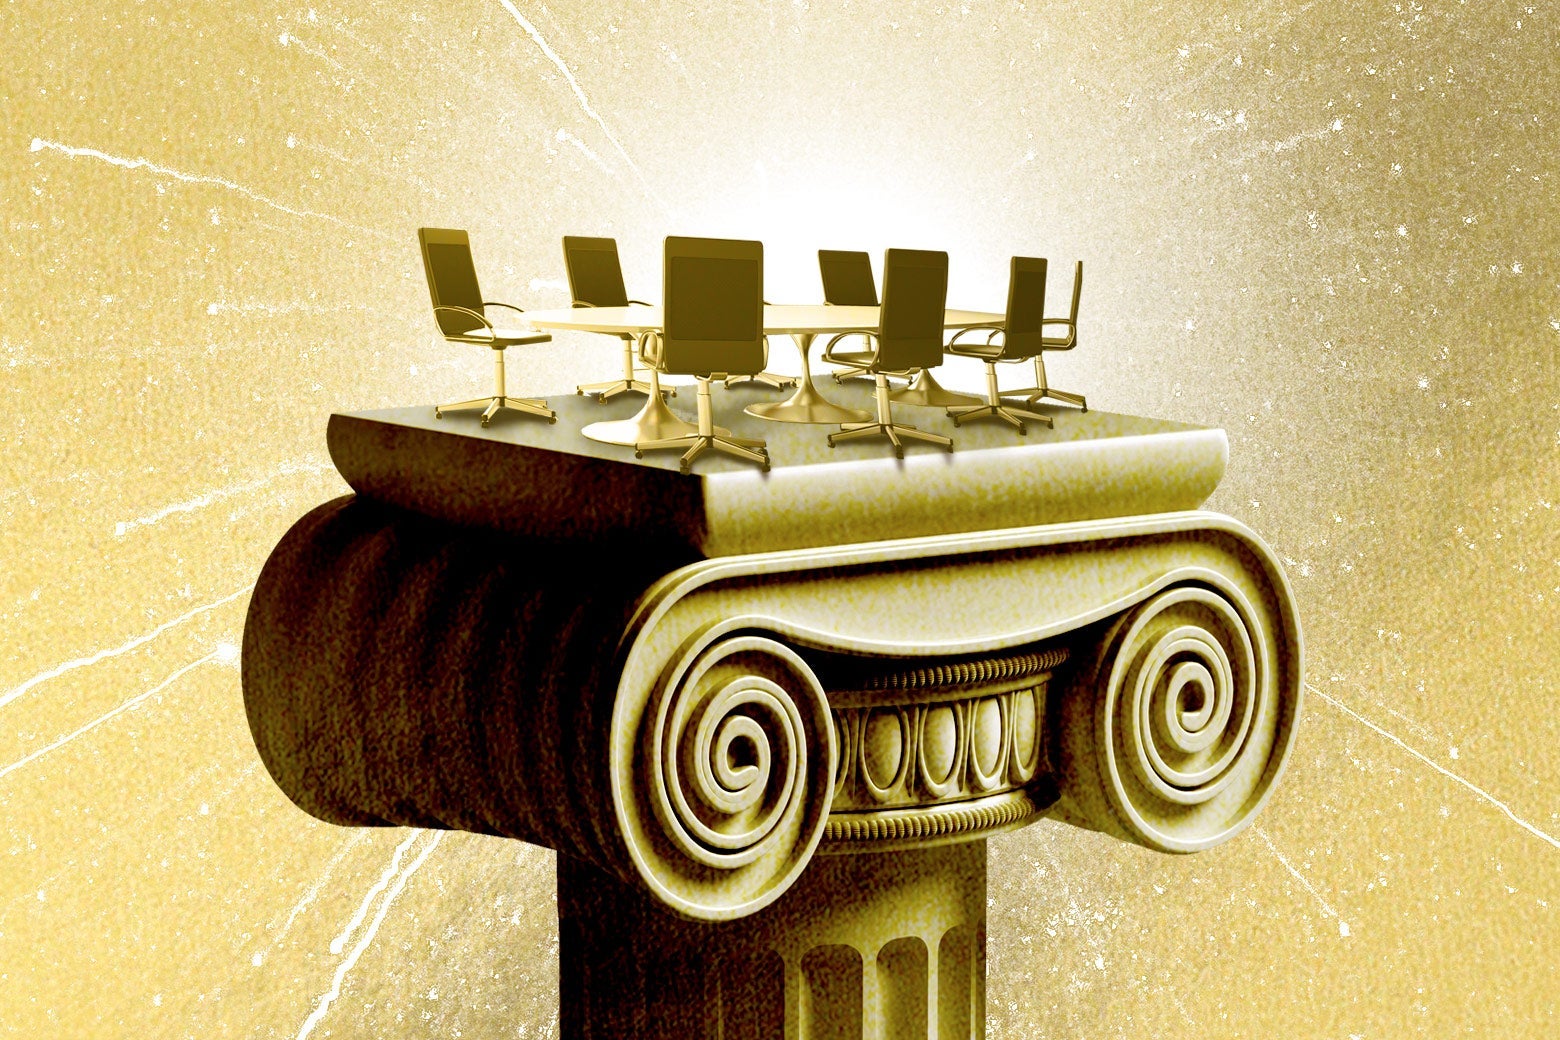 A conference table and chairs, glowing in gold, sit atop a golden Ionic column.